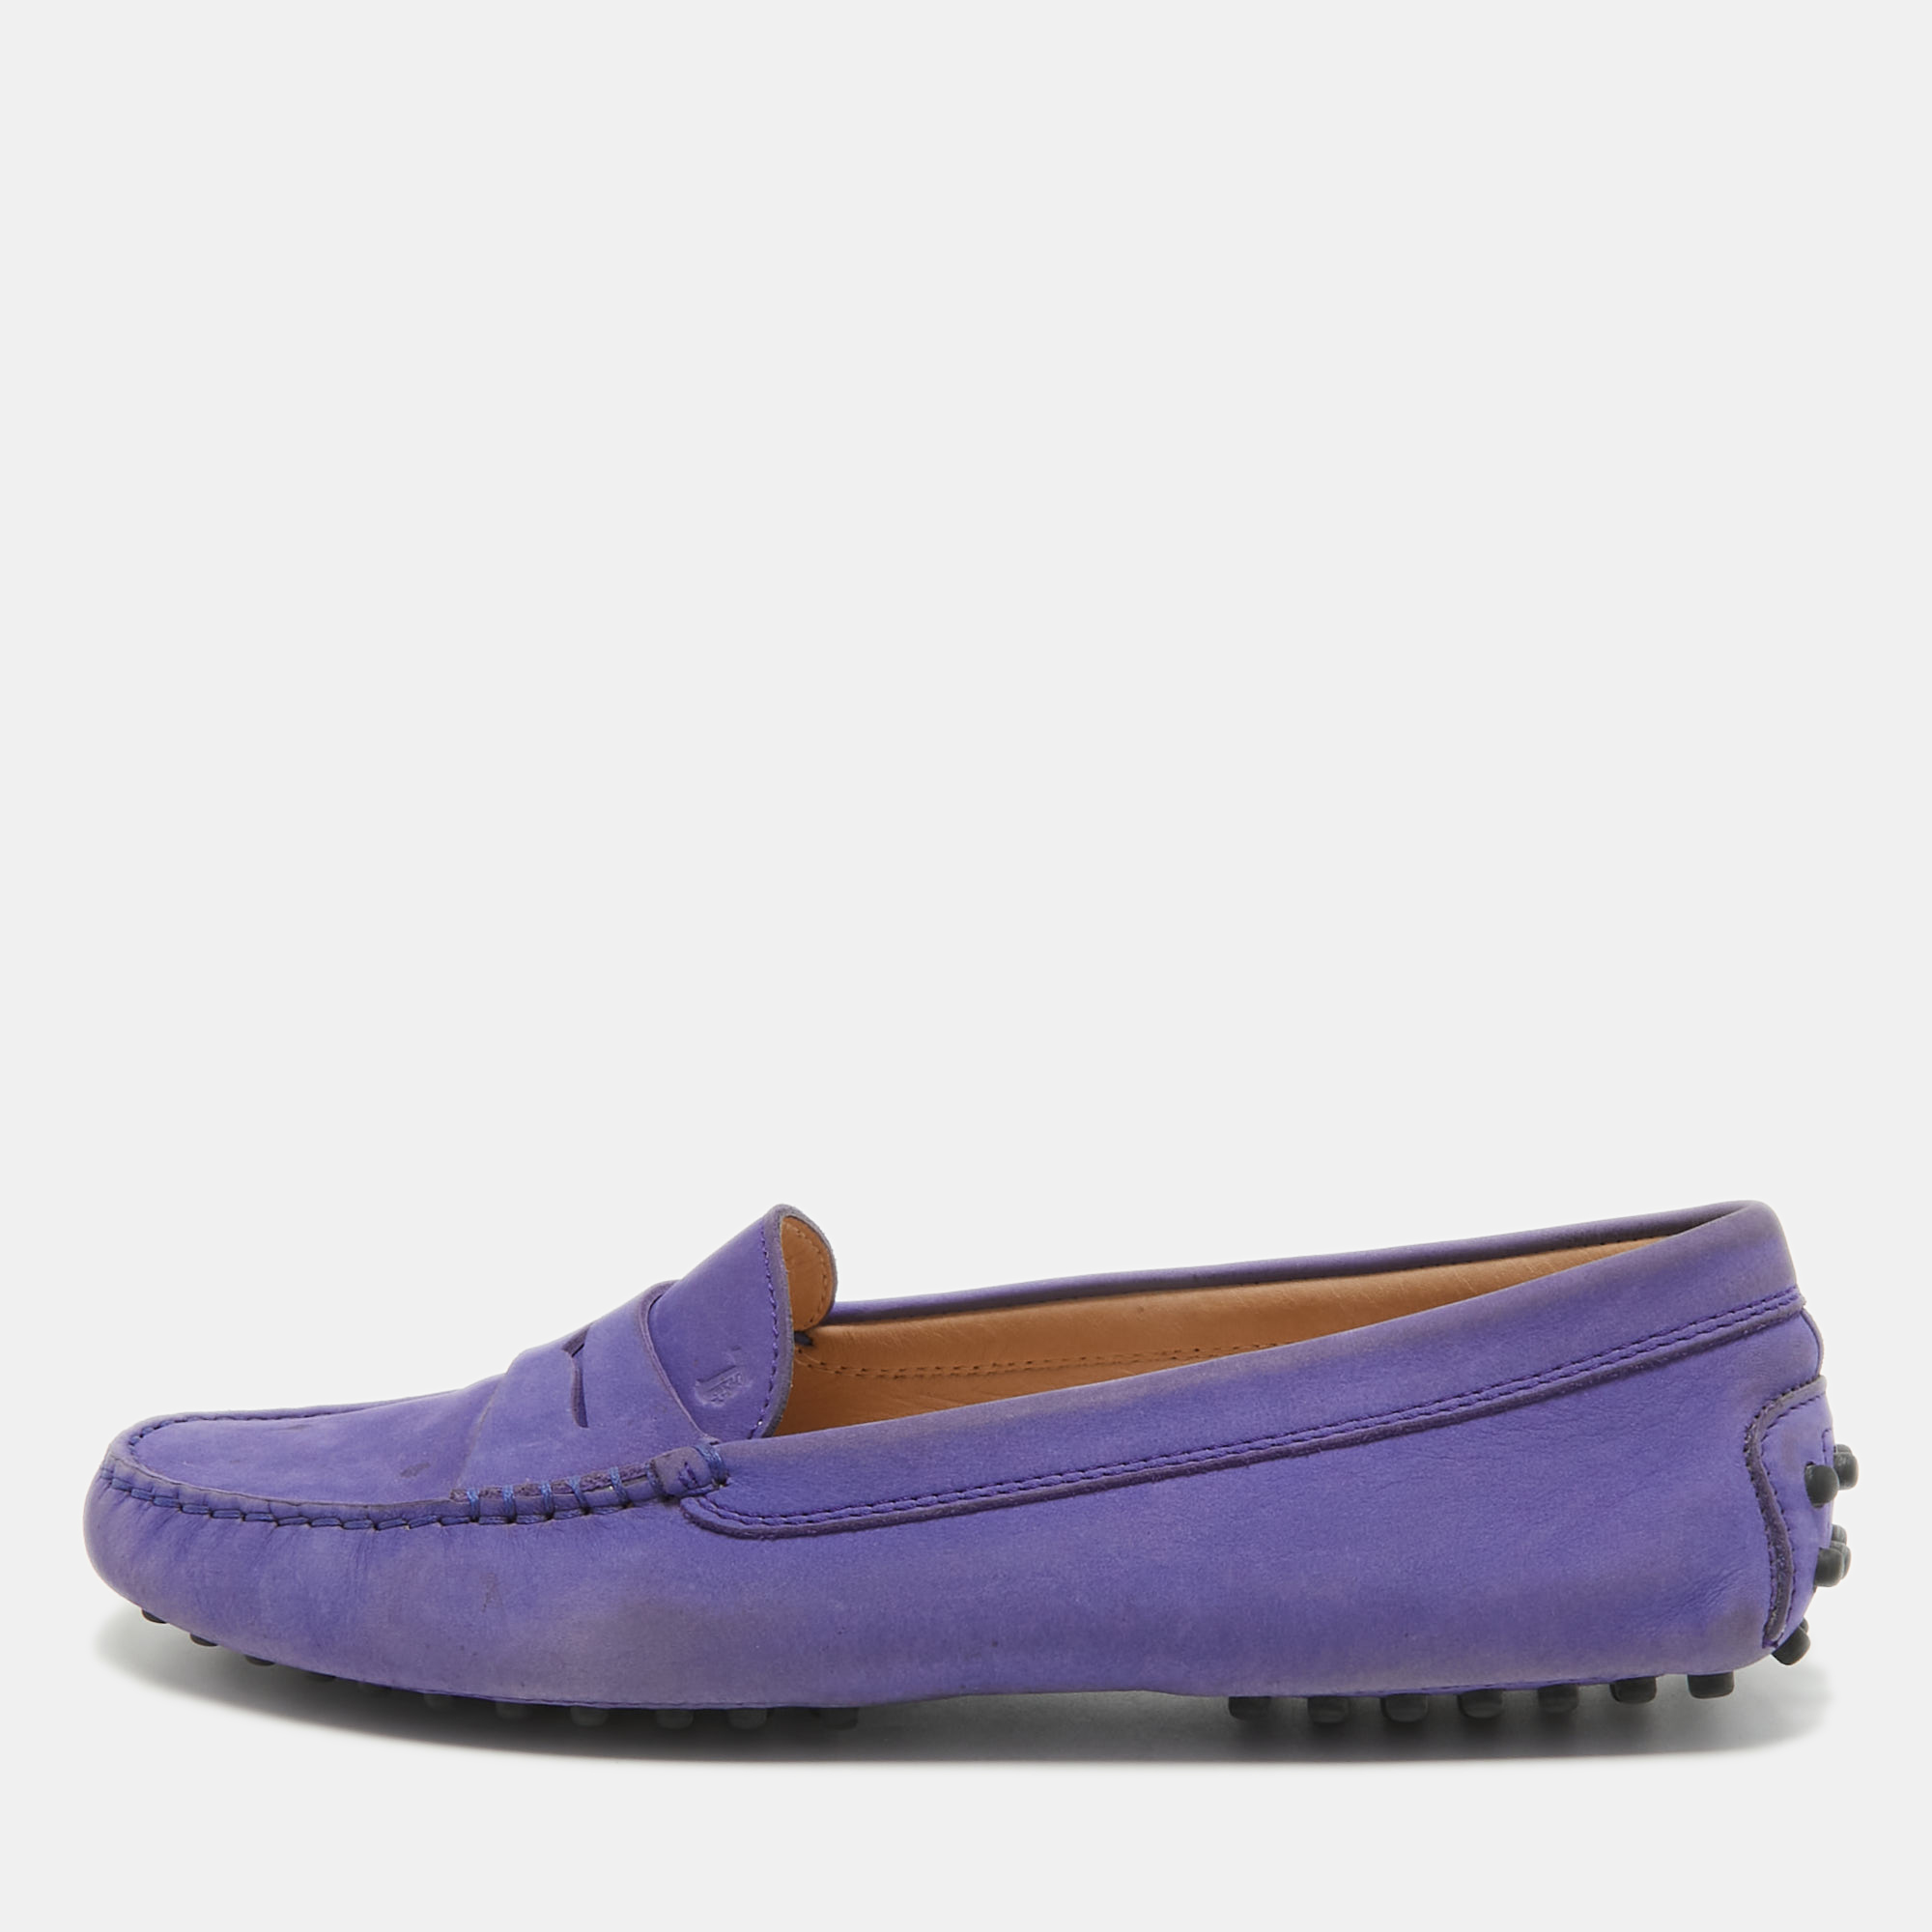 Tod's  purple suede  slip on loafers size 39